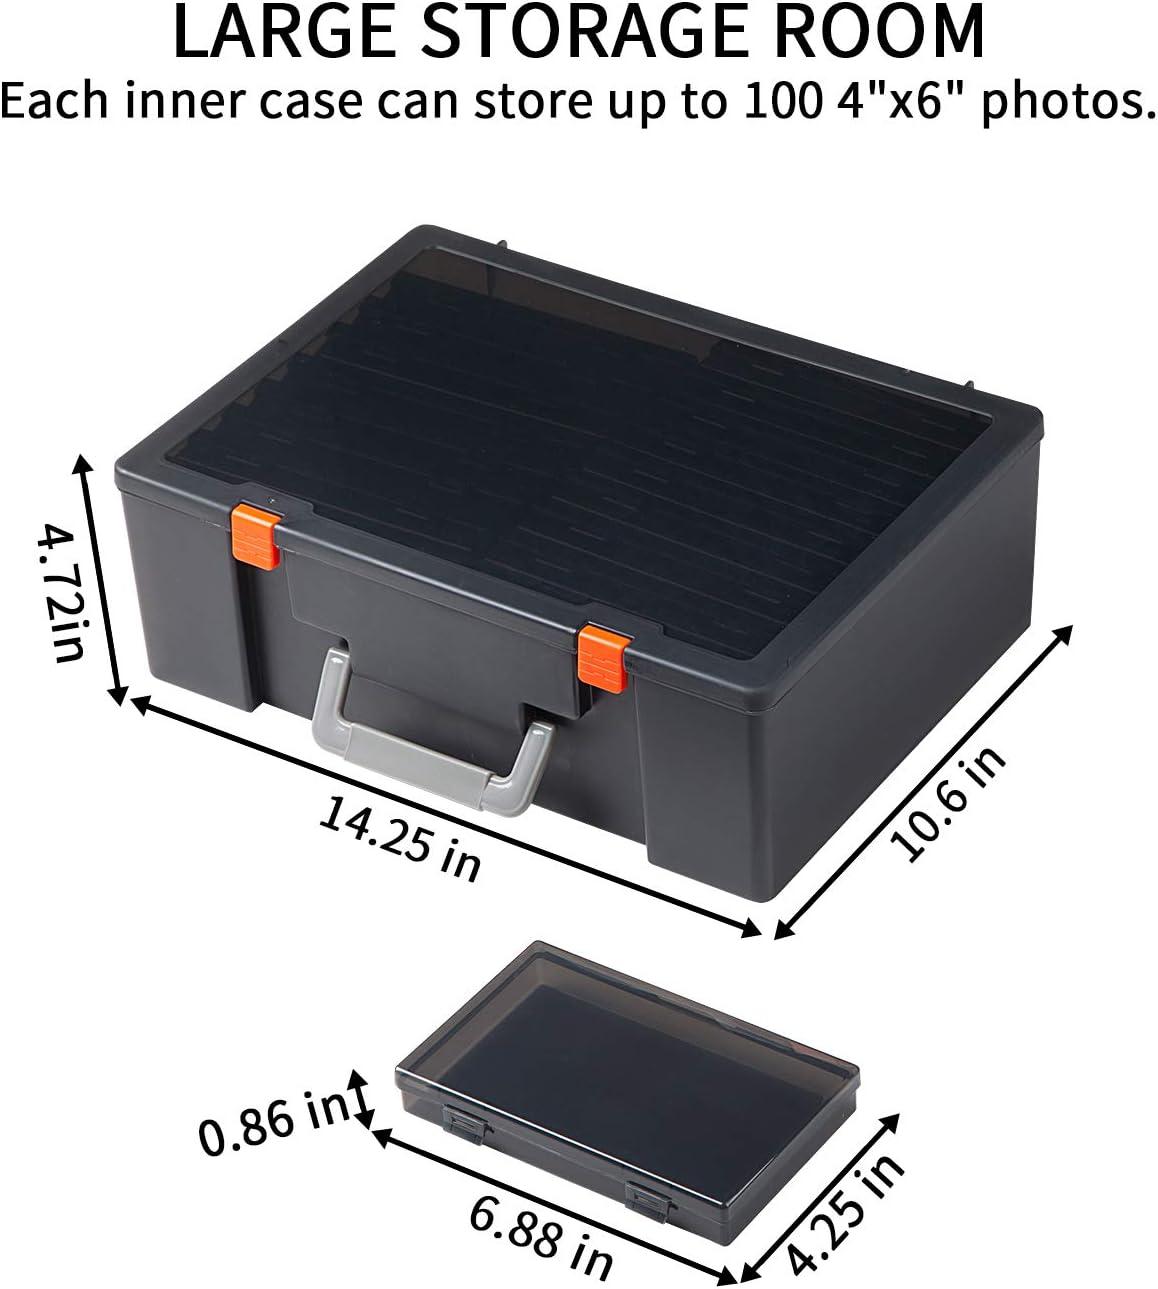  Photo Storage Box 4x6, 18 Inner Extra Large Photo Case Large  Photo Organizer Acid-Free Photo Box Storage Photo Keeper Photo Storage  Case, Plastic Craft Storage Box for Photo Stickers Stamps Seeds,18